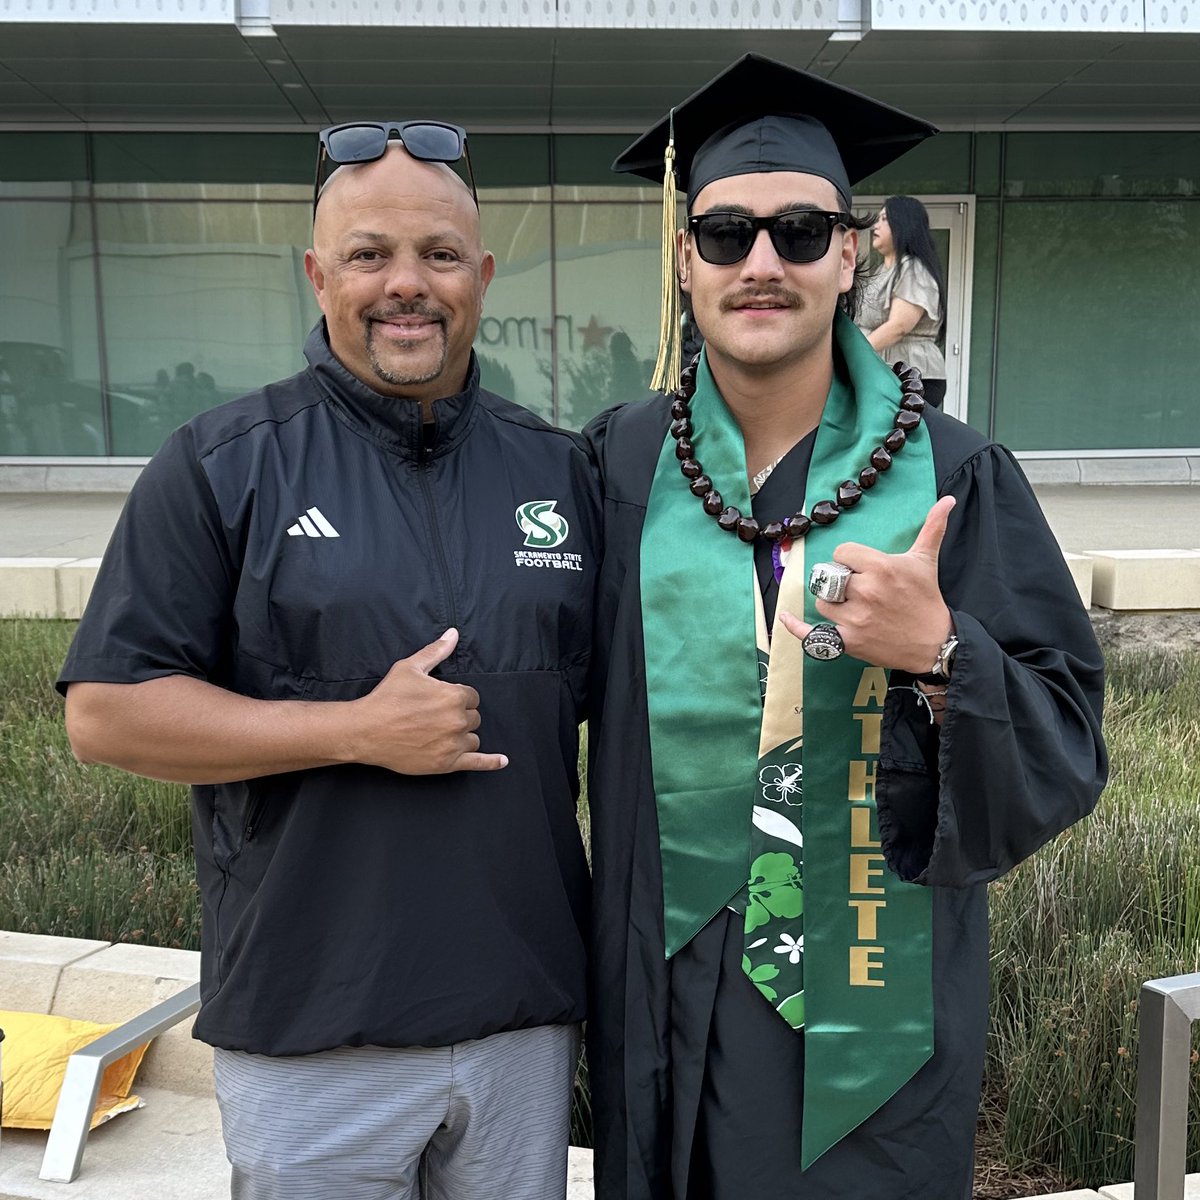 WOW‼️ Two more taking the ‘walk’ this morning! Sooooo proud of the path these two have been on - Rings, Championships, & Degrees! Love you guys - Now get out there and dominate the WORLD. 🌎 #SHARKs #SaStateGraduation